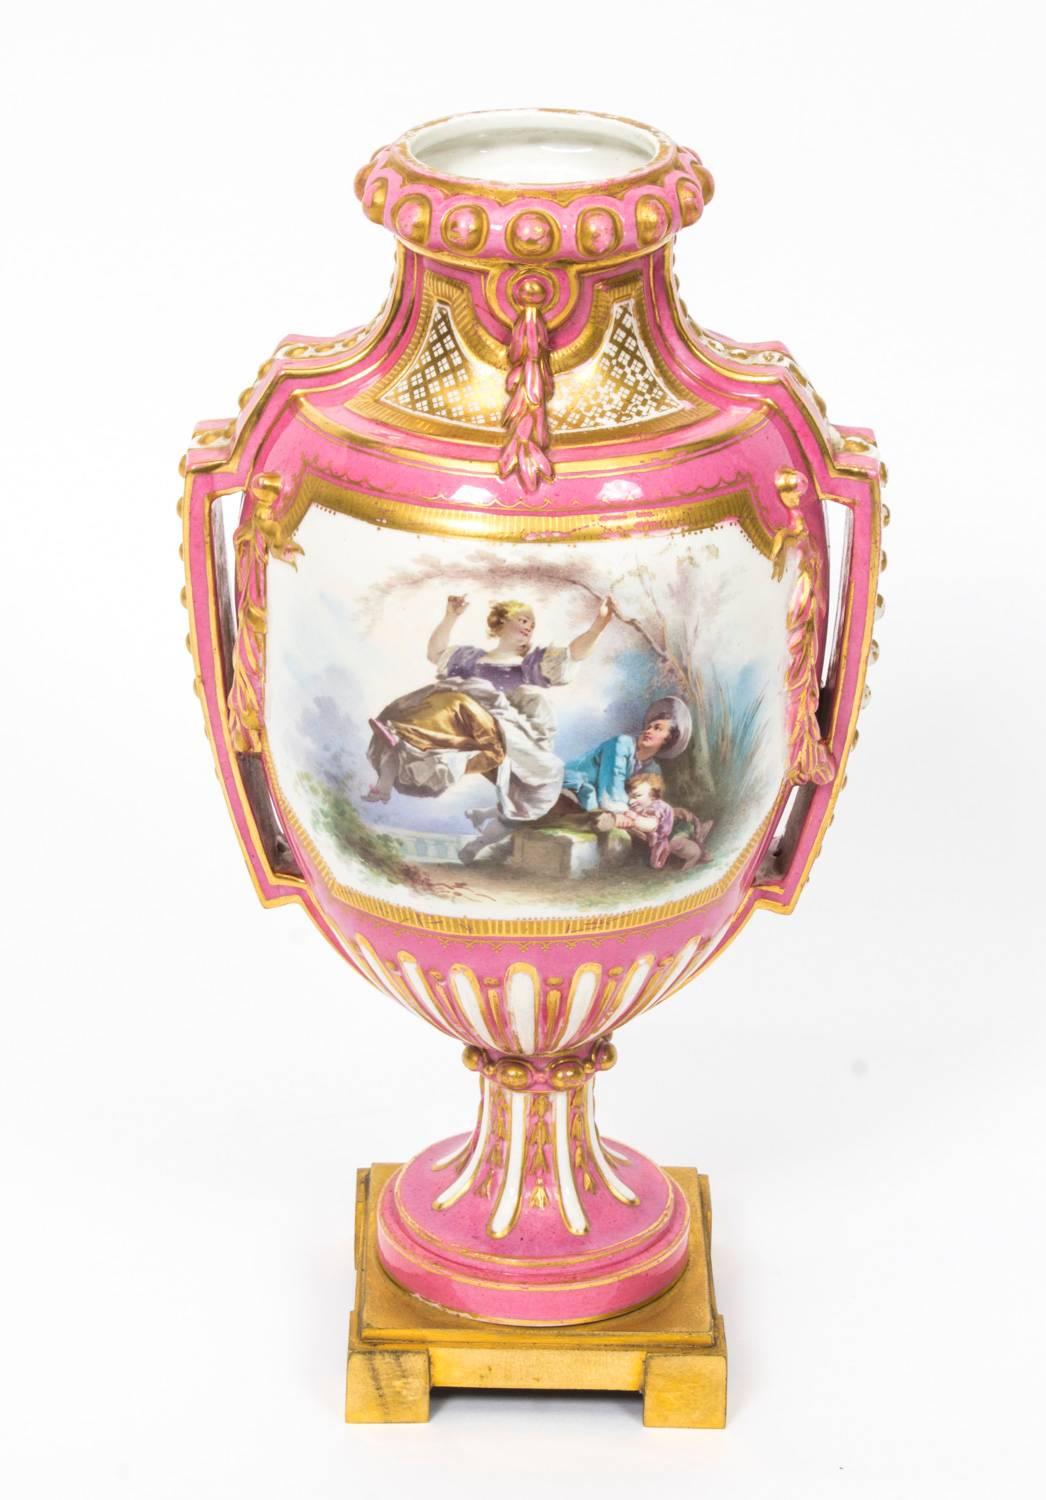 This is a beautiful antique pair of French Sevres porcelain and ormolu-mounted vases and covers, circa 1880 in date.

They are superbly decorated with hand painted panels of flowers and scenes of courting couples, after Boucher, on pink gilde